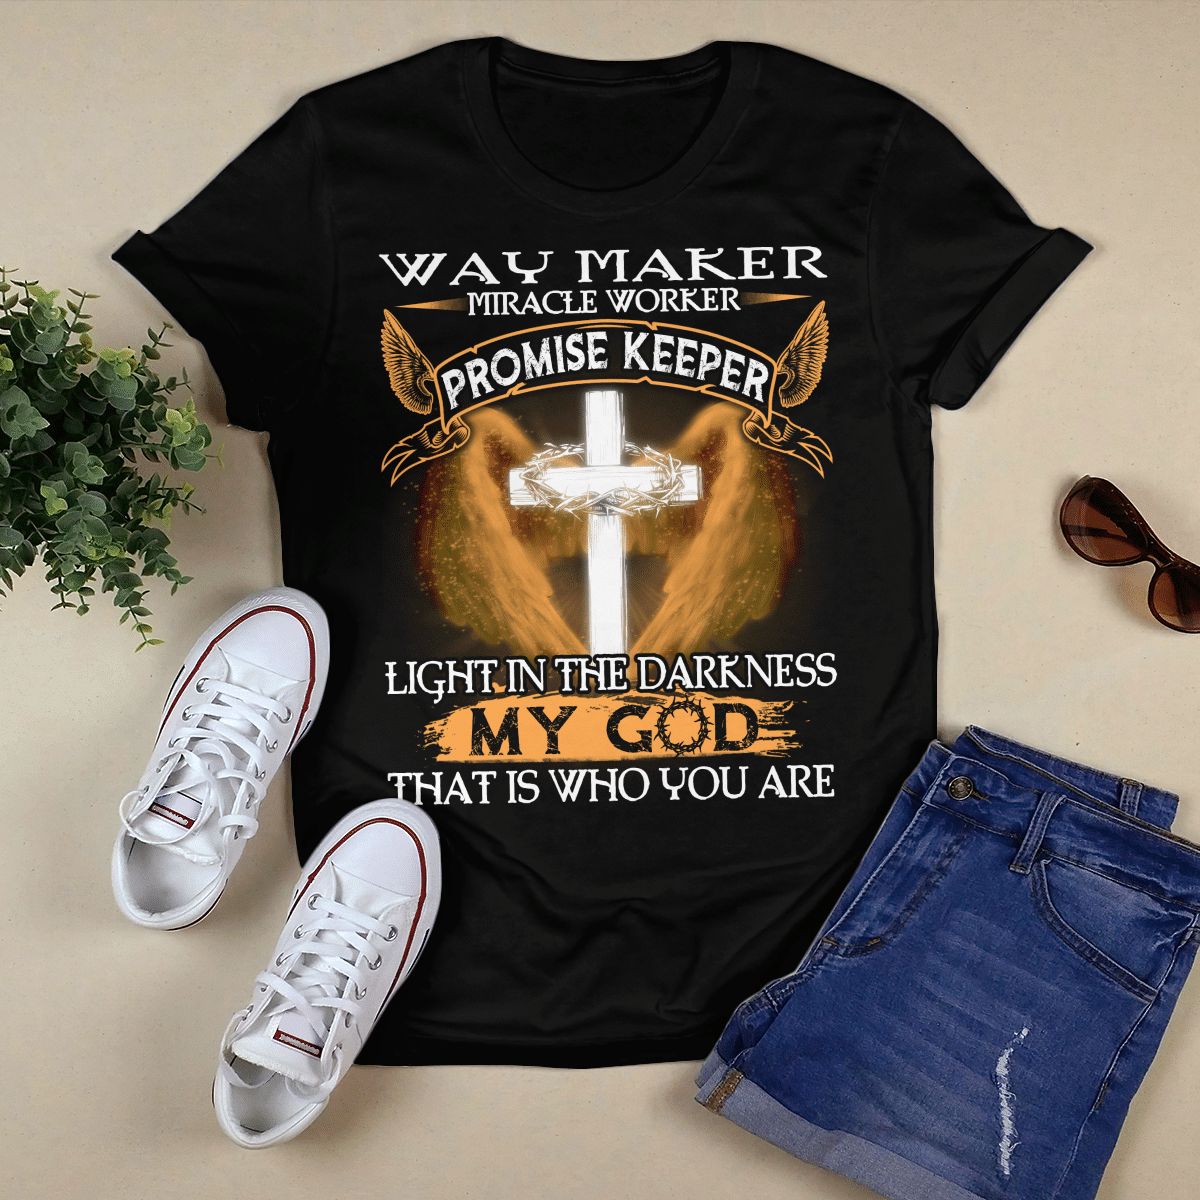 Cross - Way Maker Miracle Worker Promise Keeper Light In The Darkness My God T-shirt - Jesus T-Shirt - Christian Shirts For Men & Women - Ciaocustom